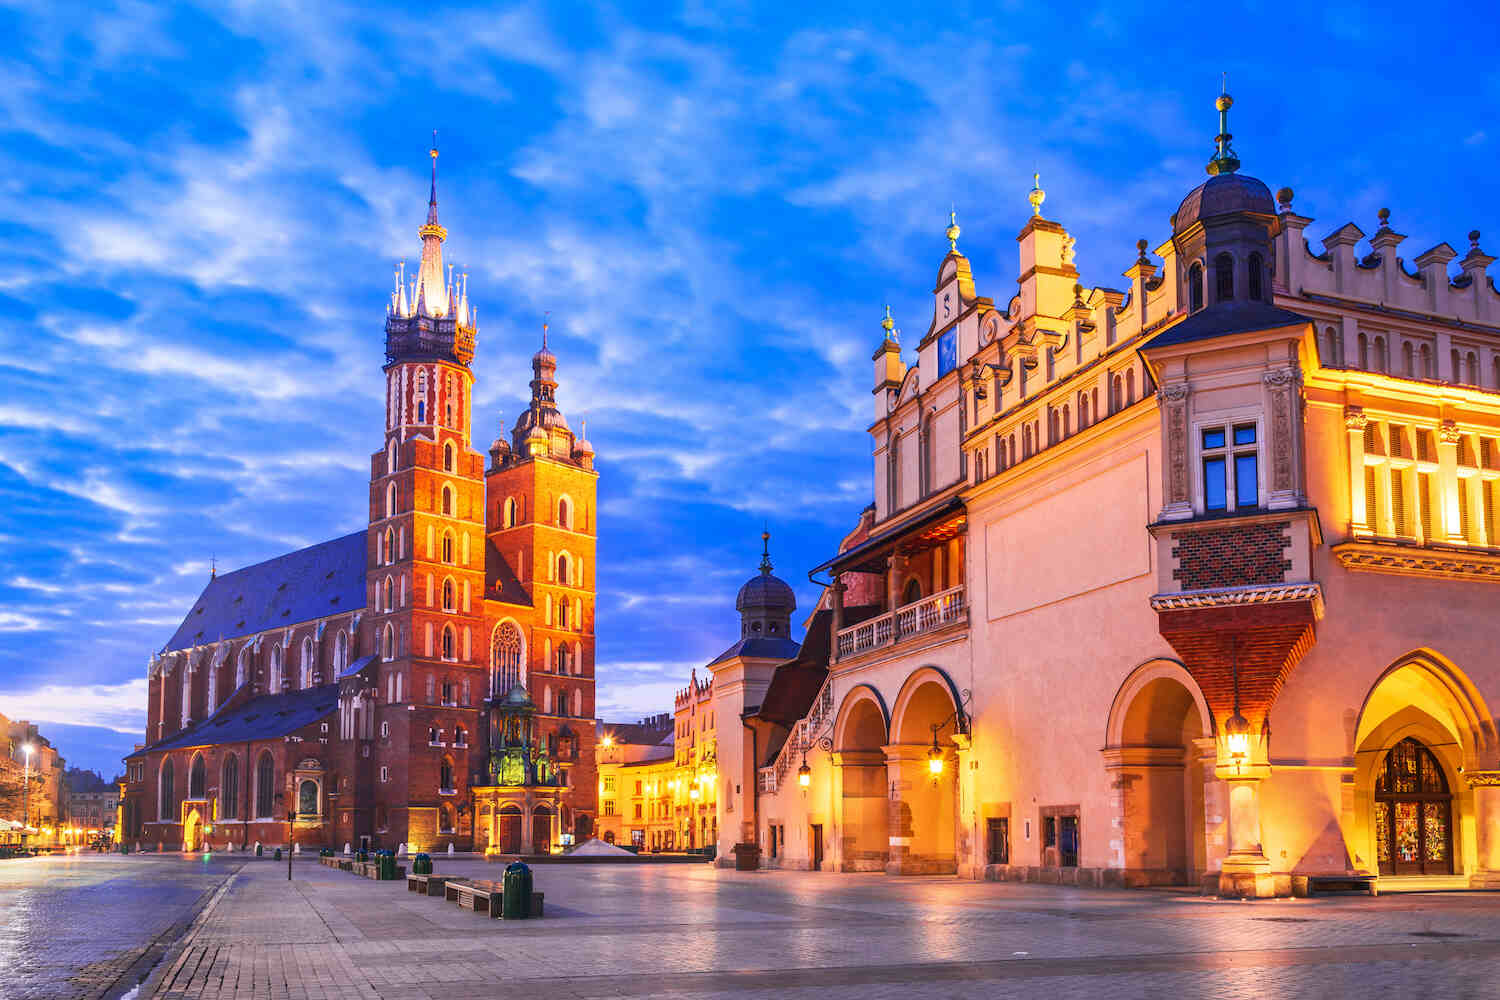 Featured image things to do in Krakow at night